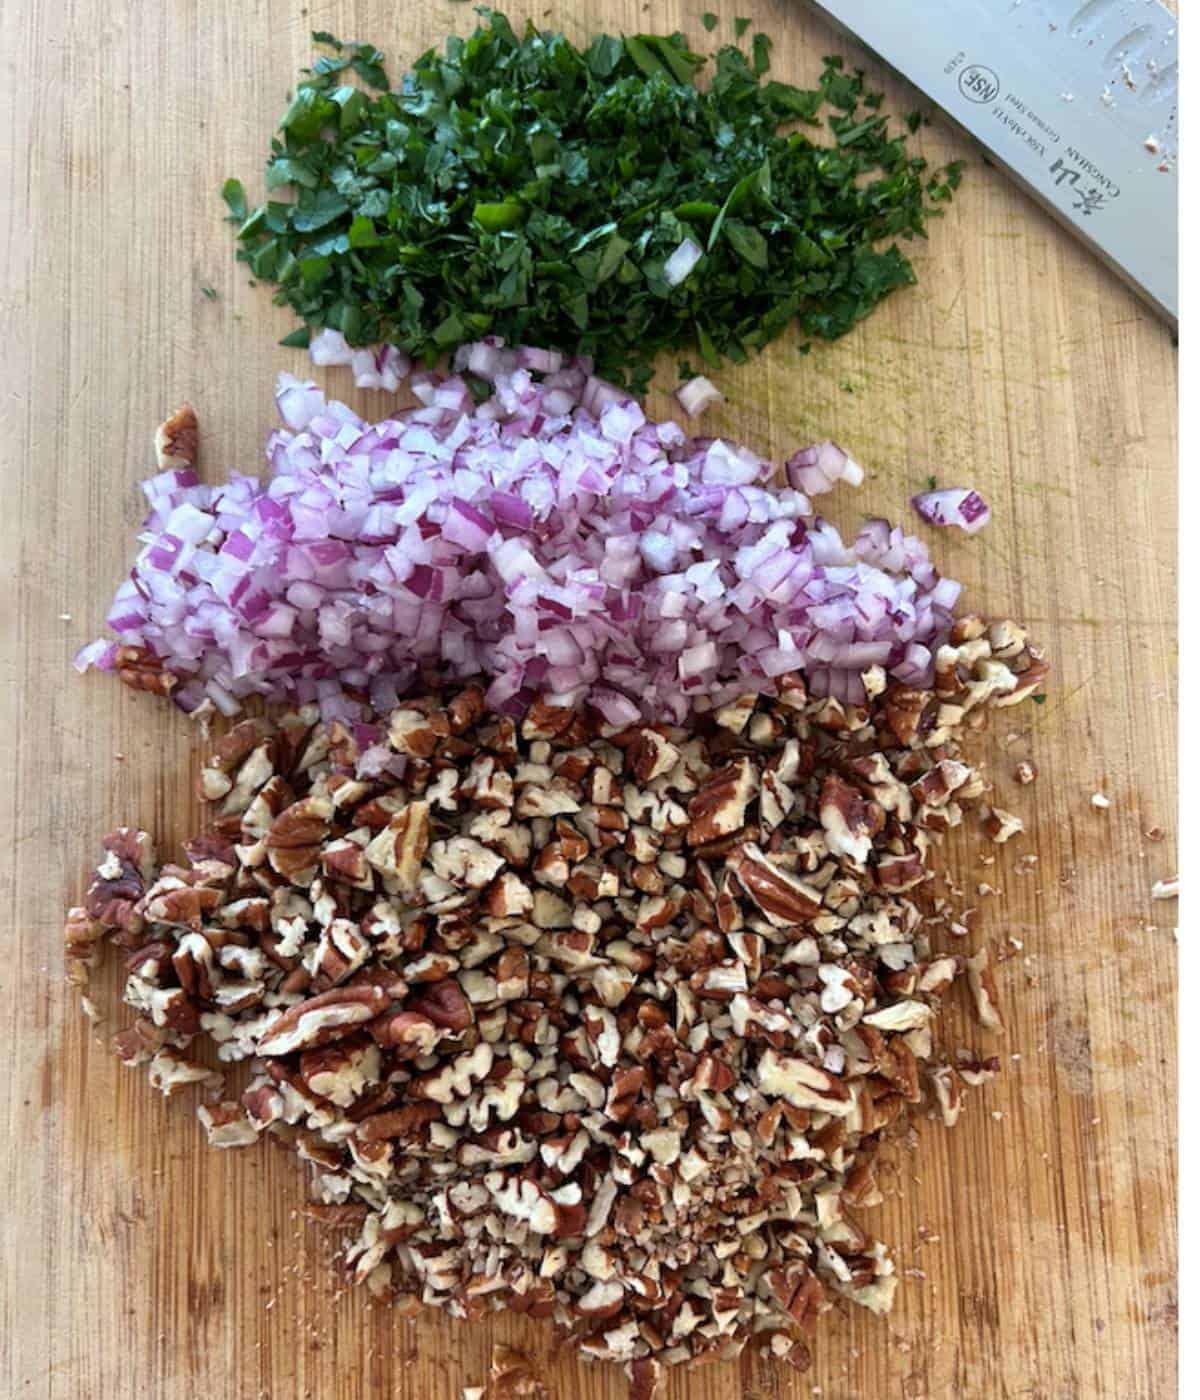 Finely chopped ingredients on cutting board.